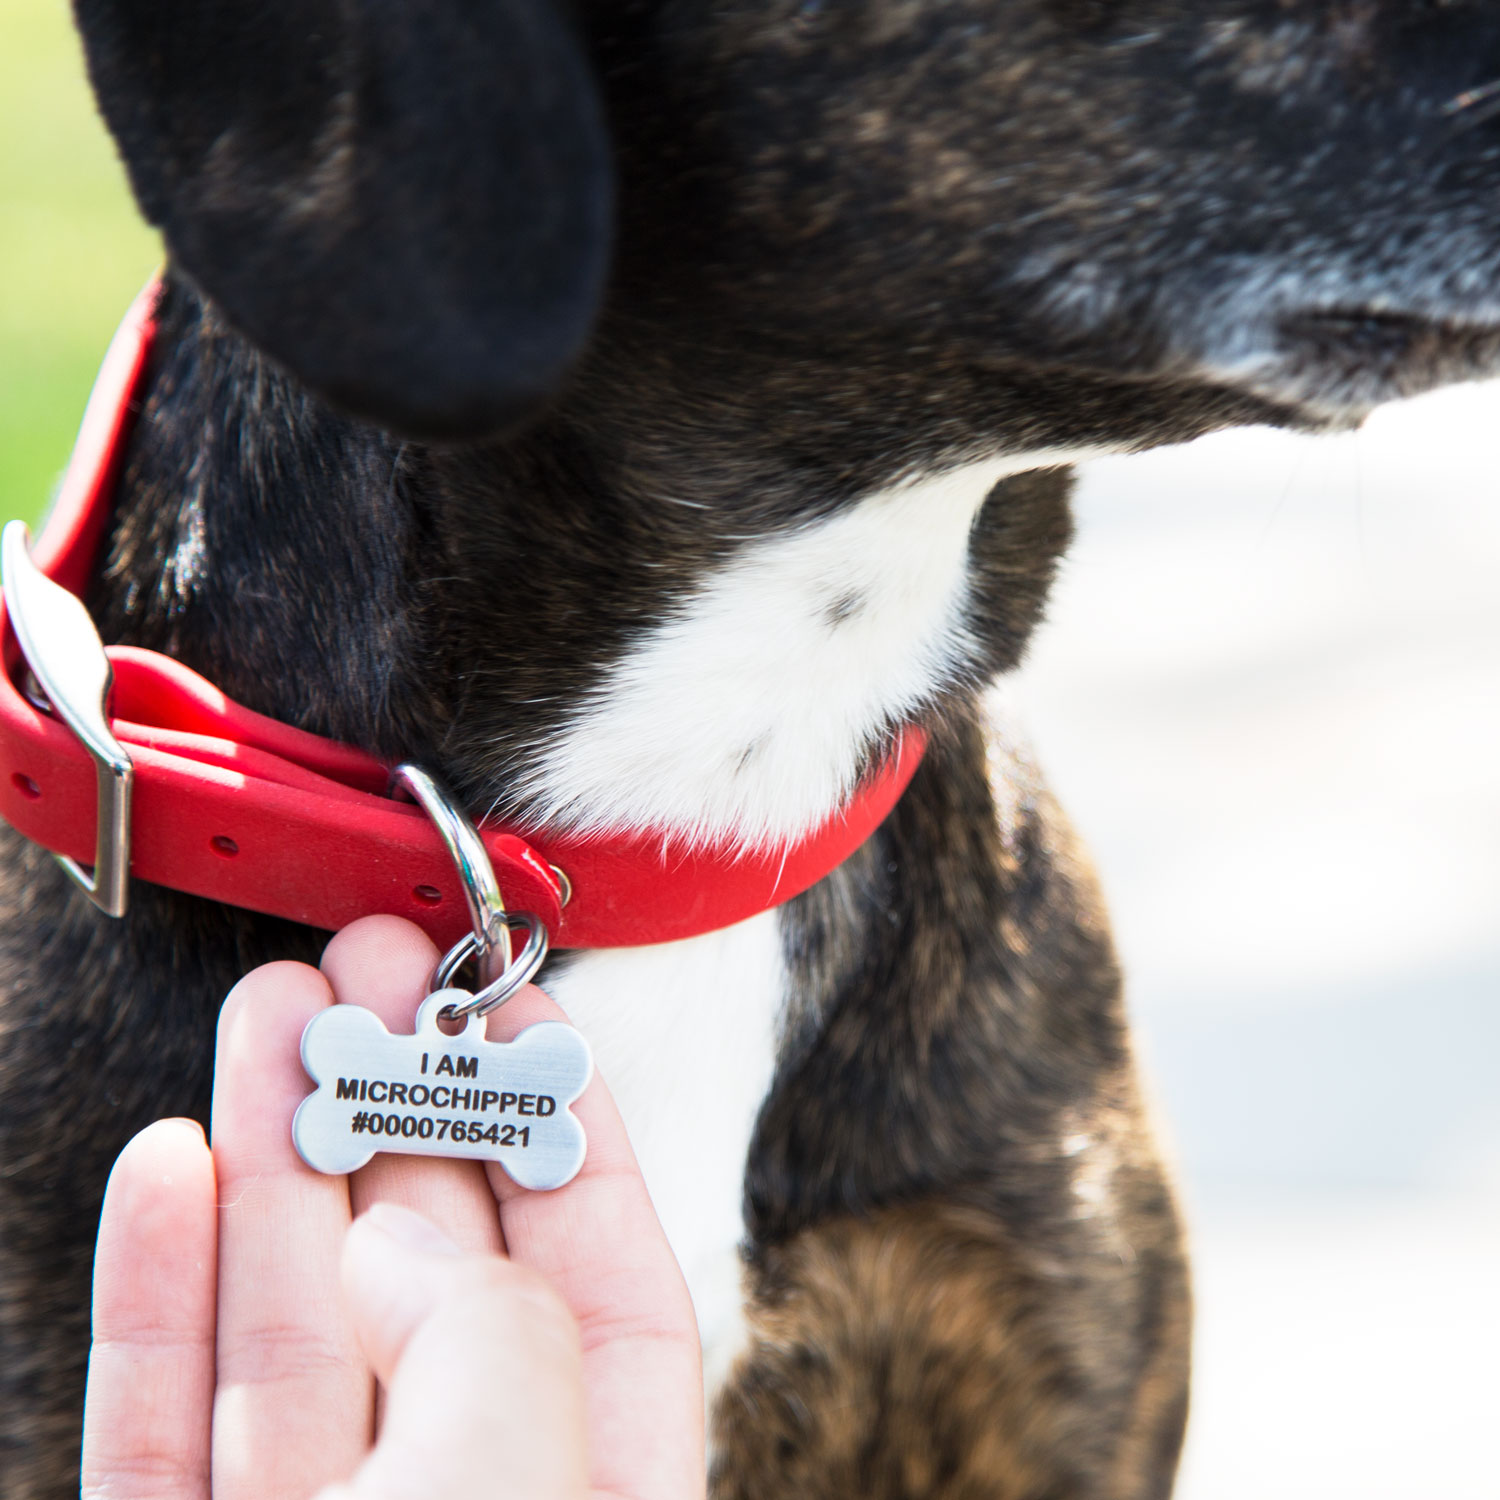 Dog with tag that includes Microchip number